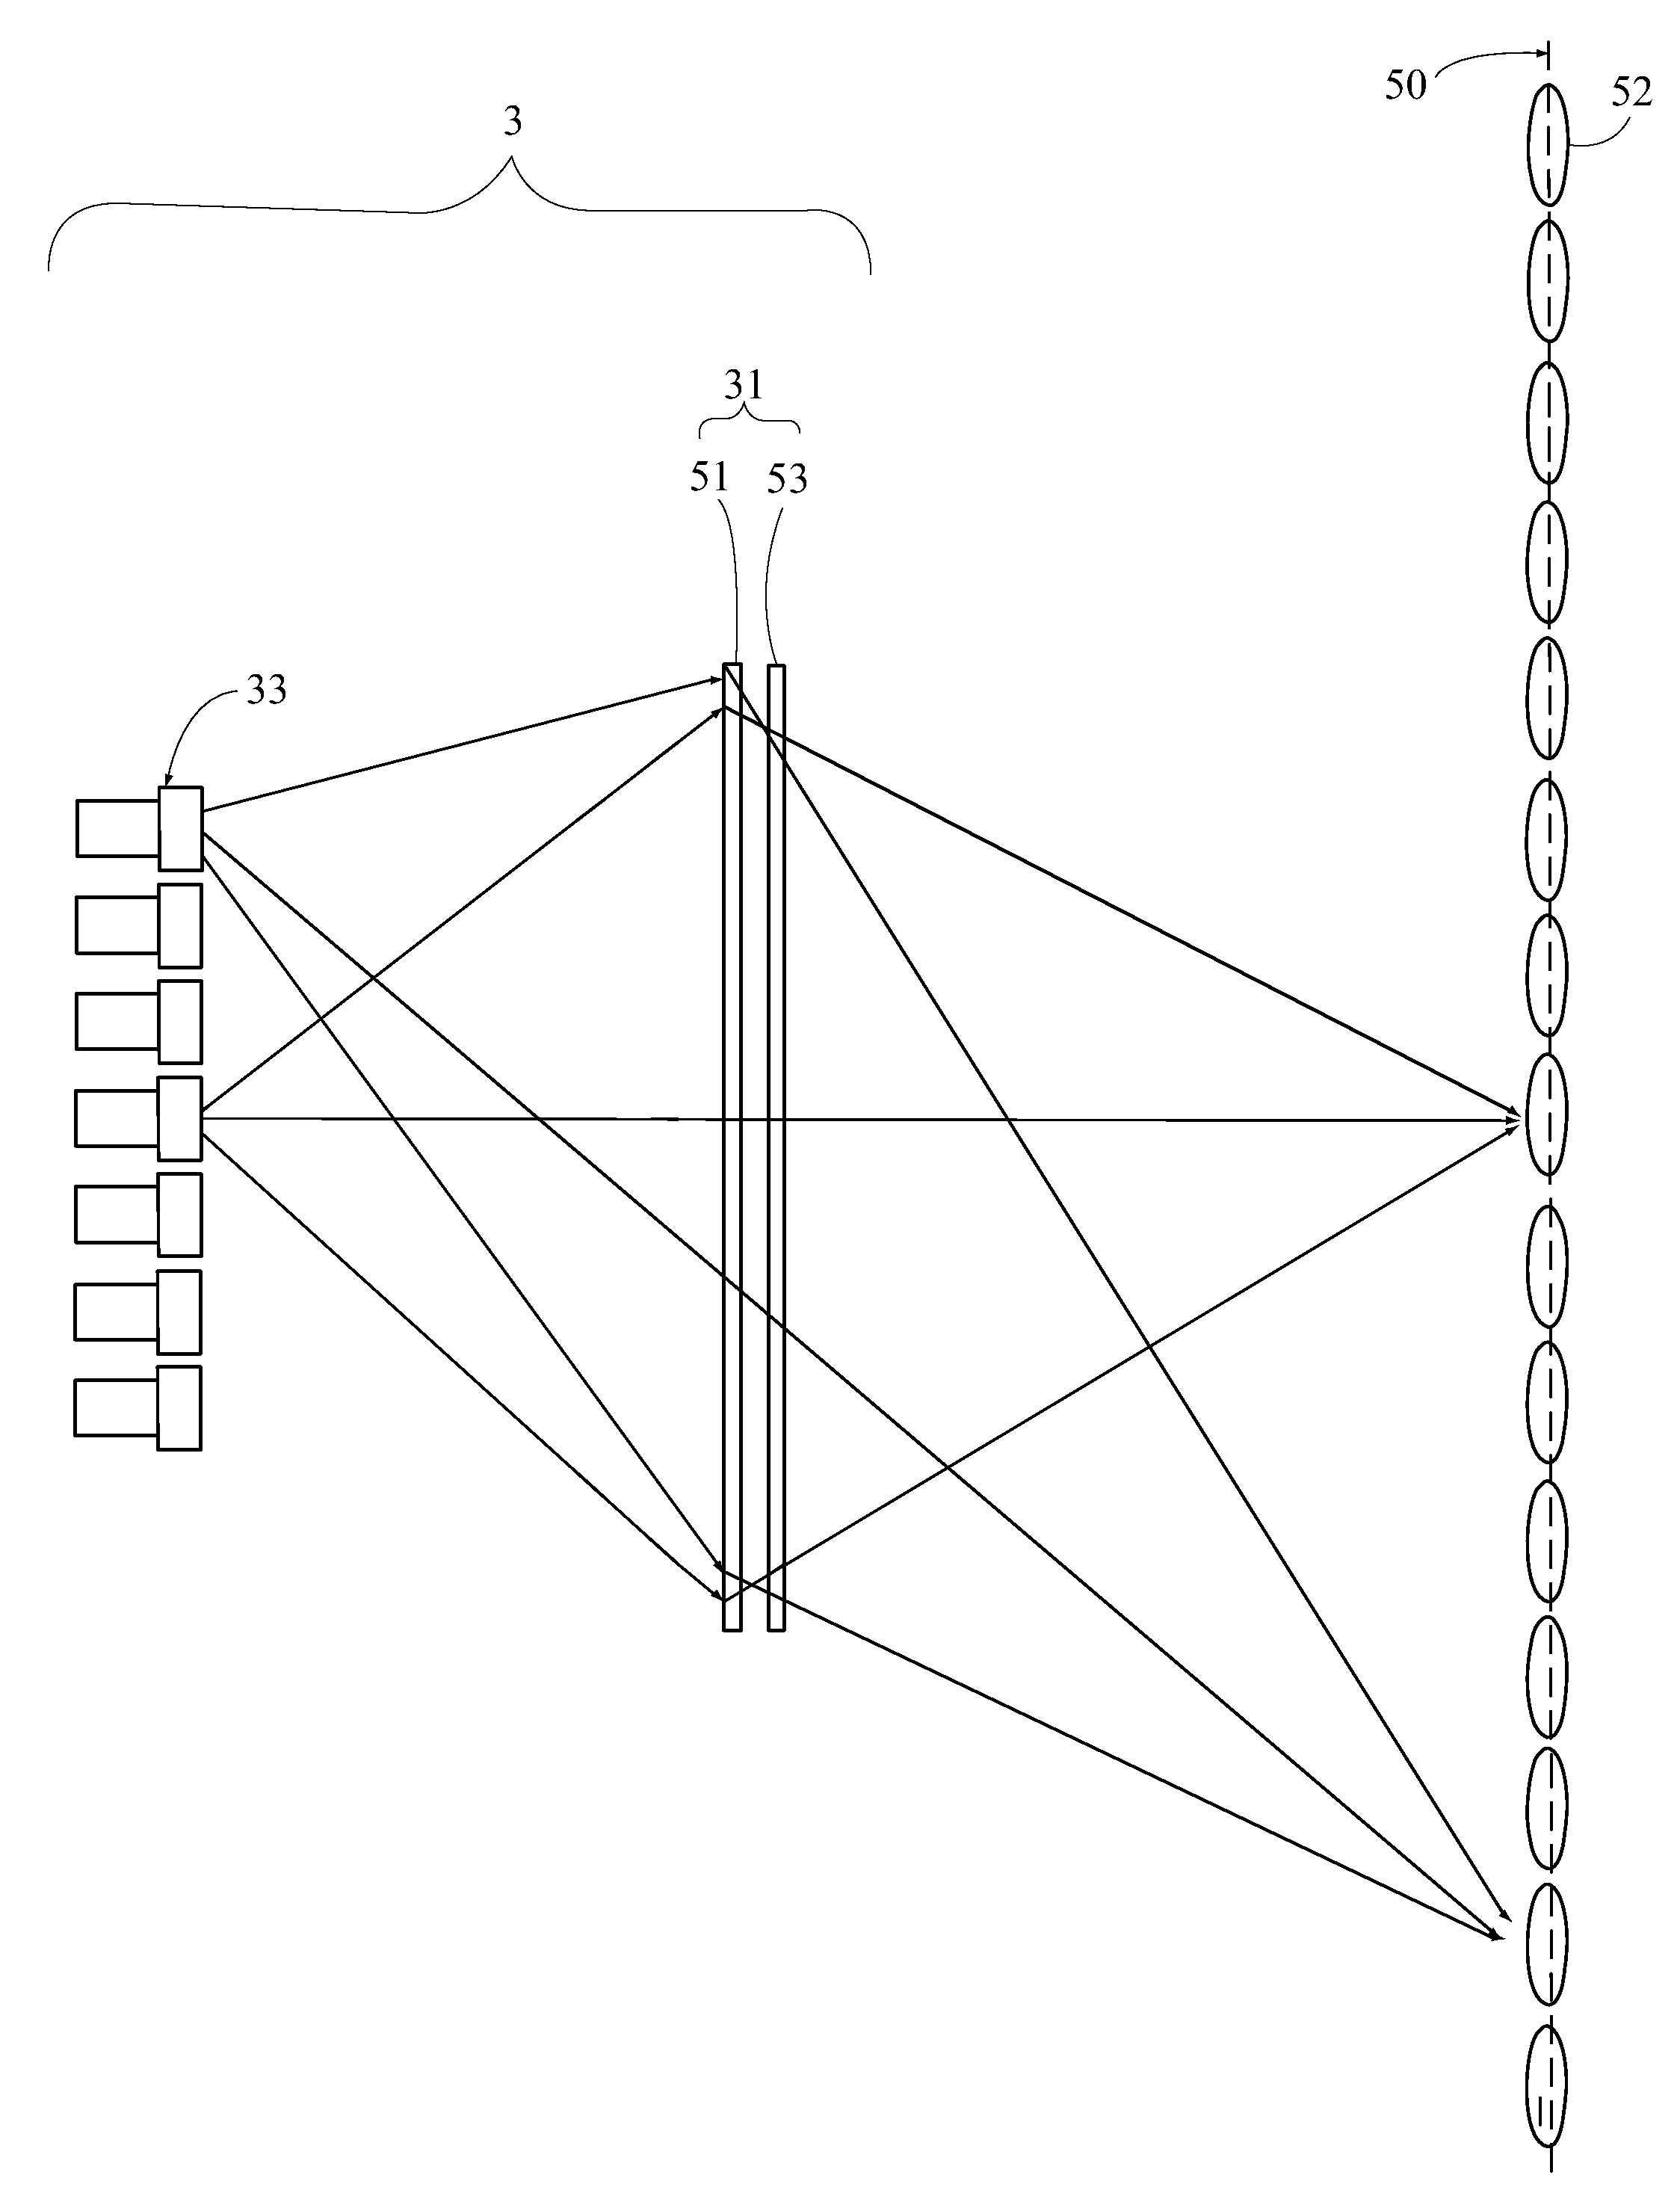 Display apparatus for displaying multiple view angle images